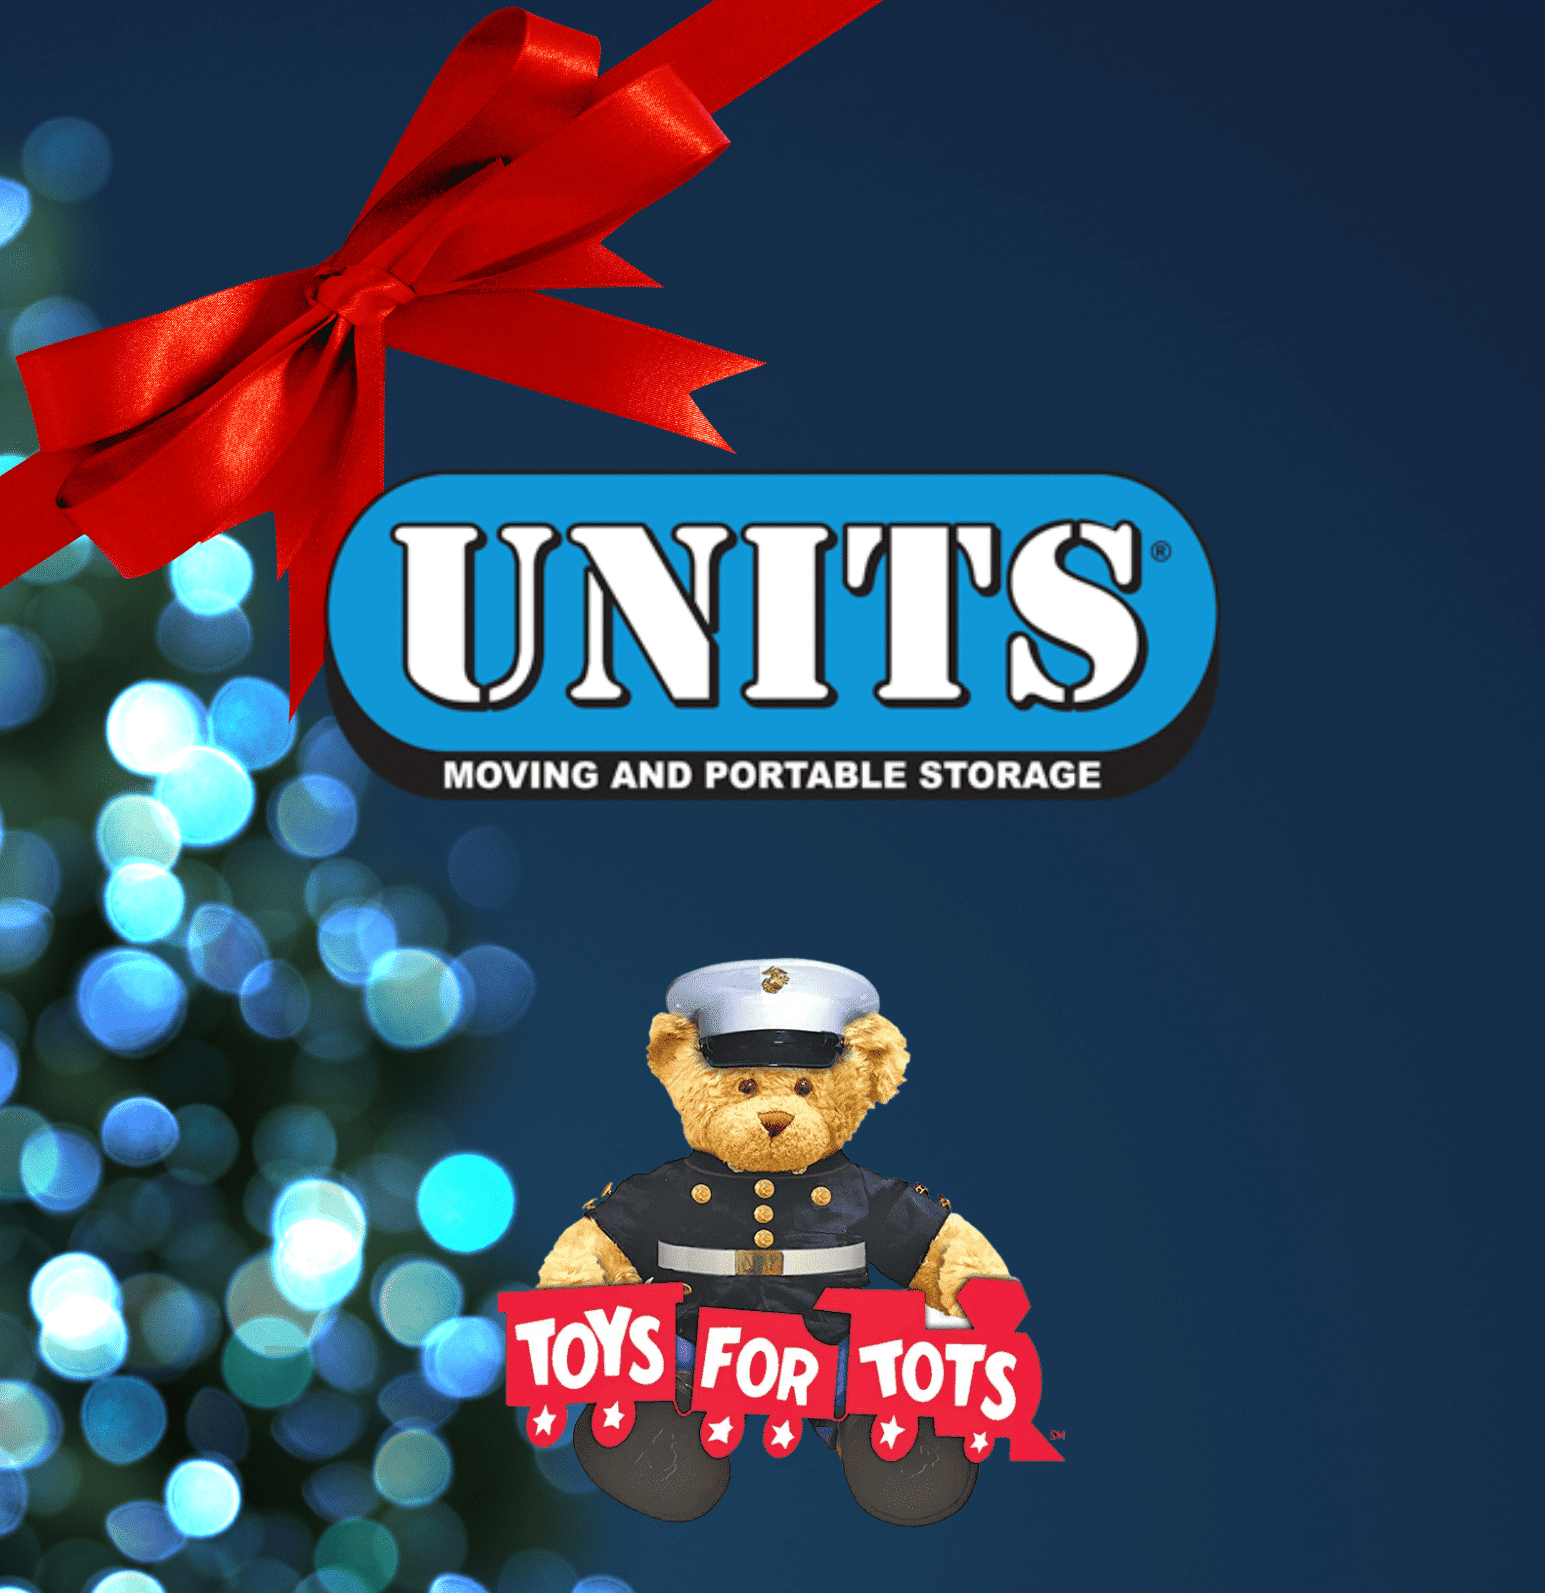 UNITS Moving and Portable Storage Teams Up with Toys for Tots